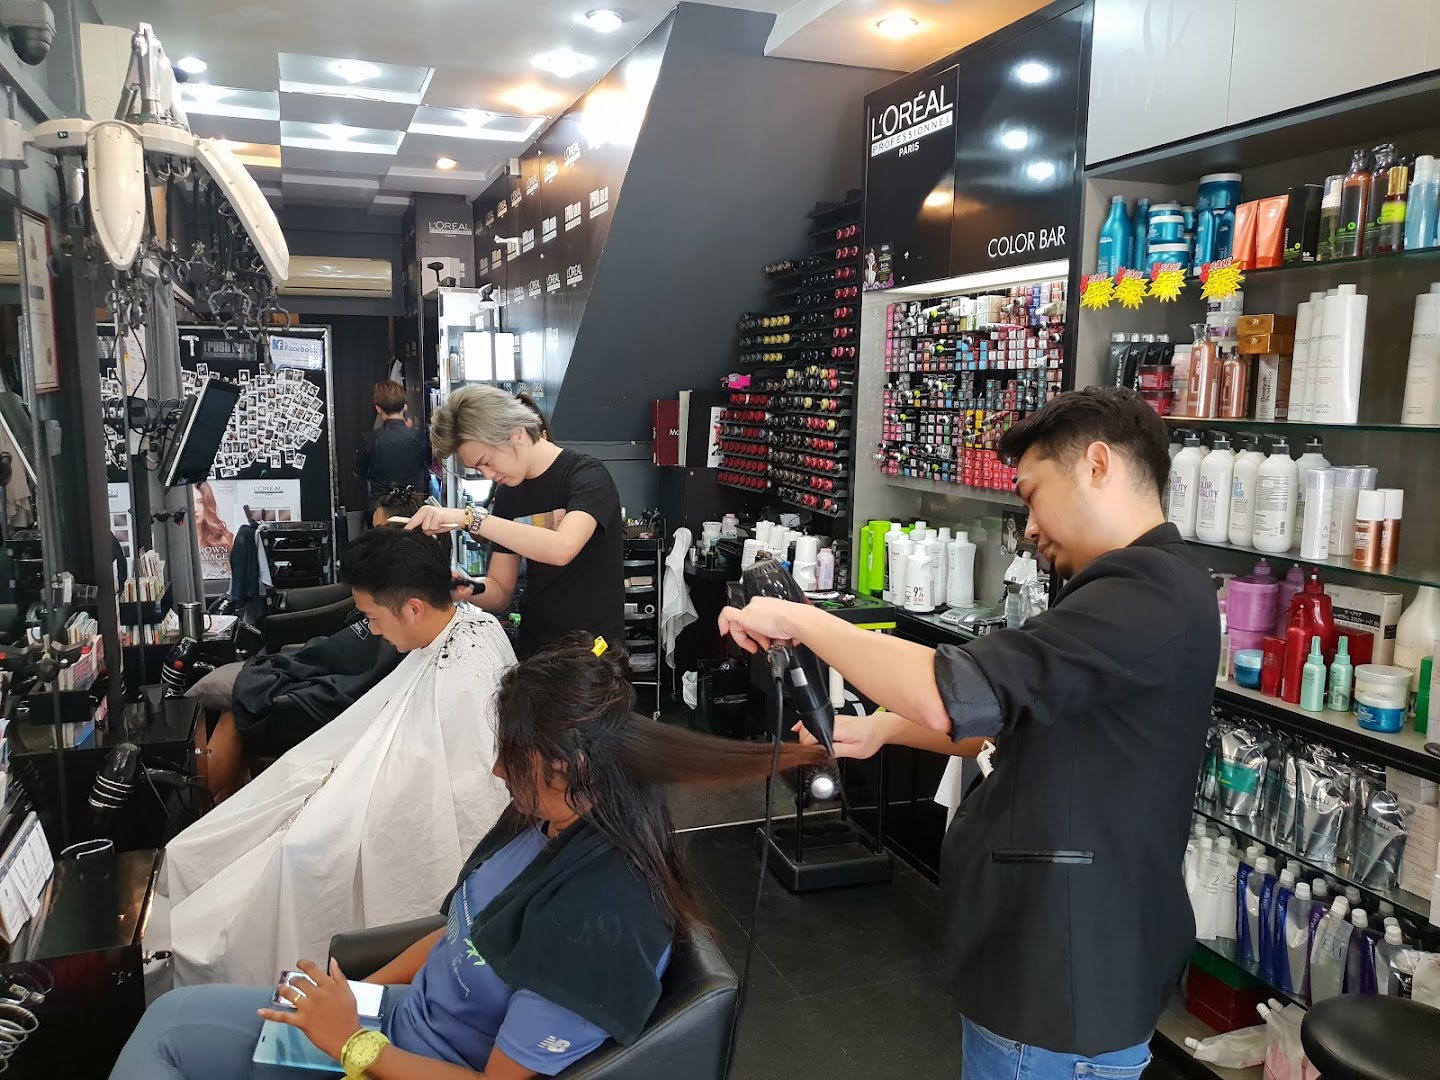 Are you checking the professionalism of a hairdresser?